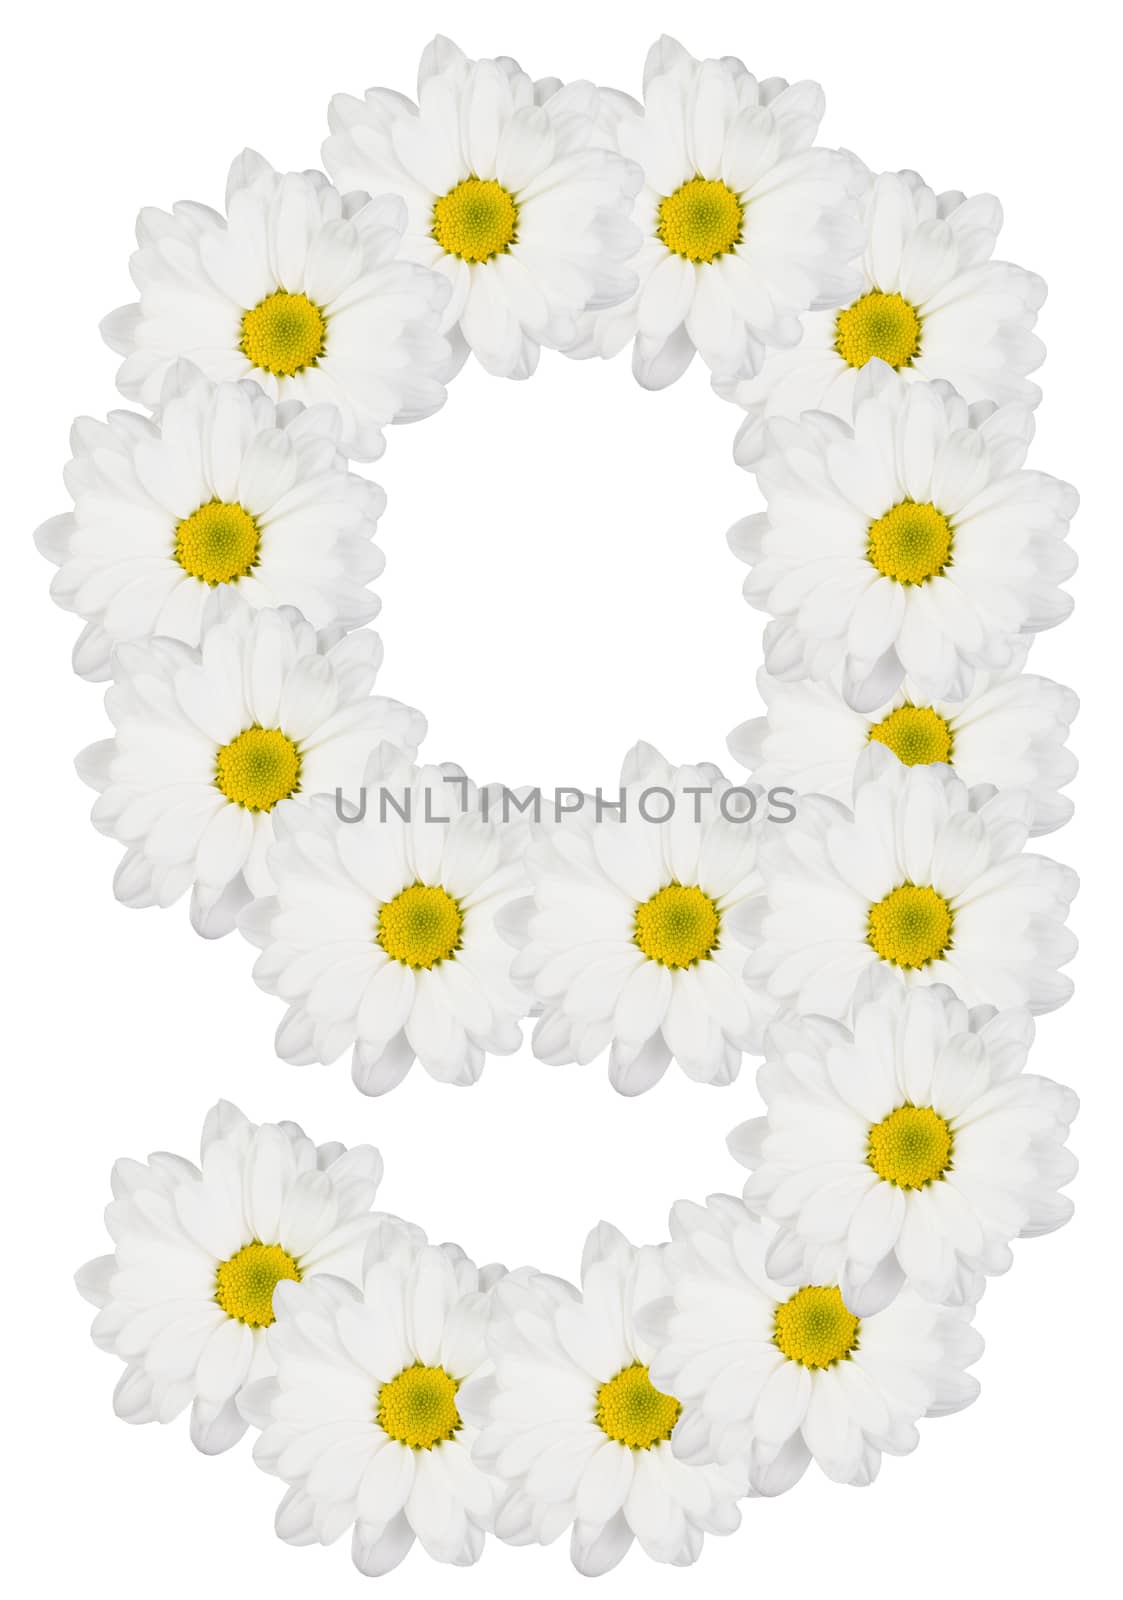 Number 9 made from white flowers